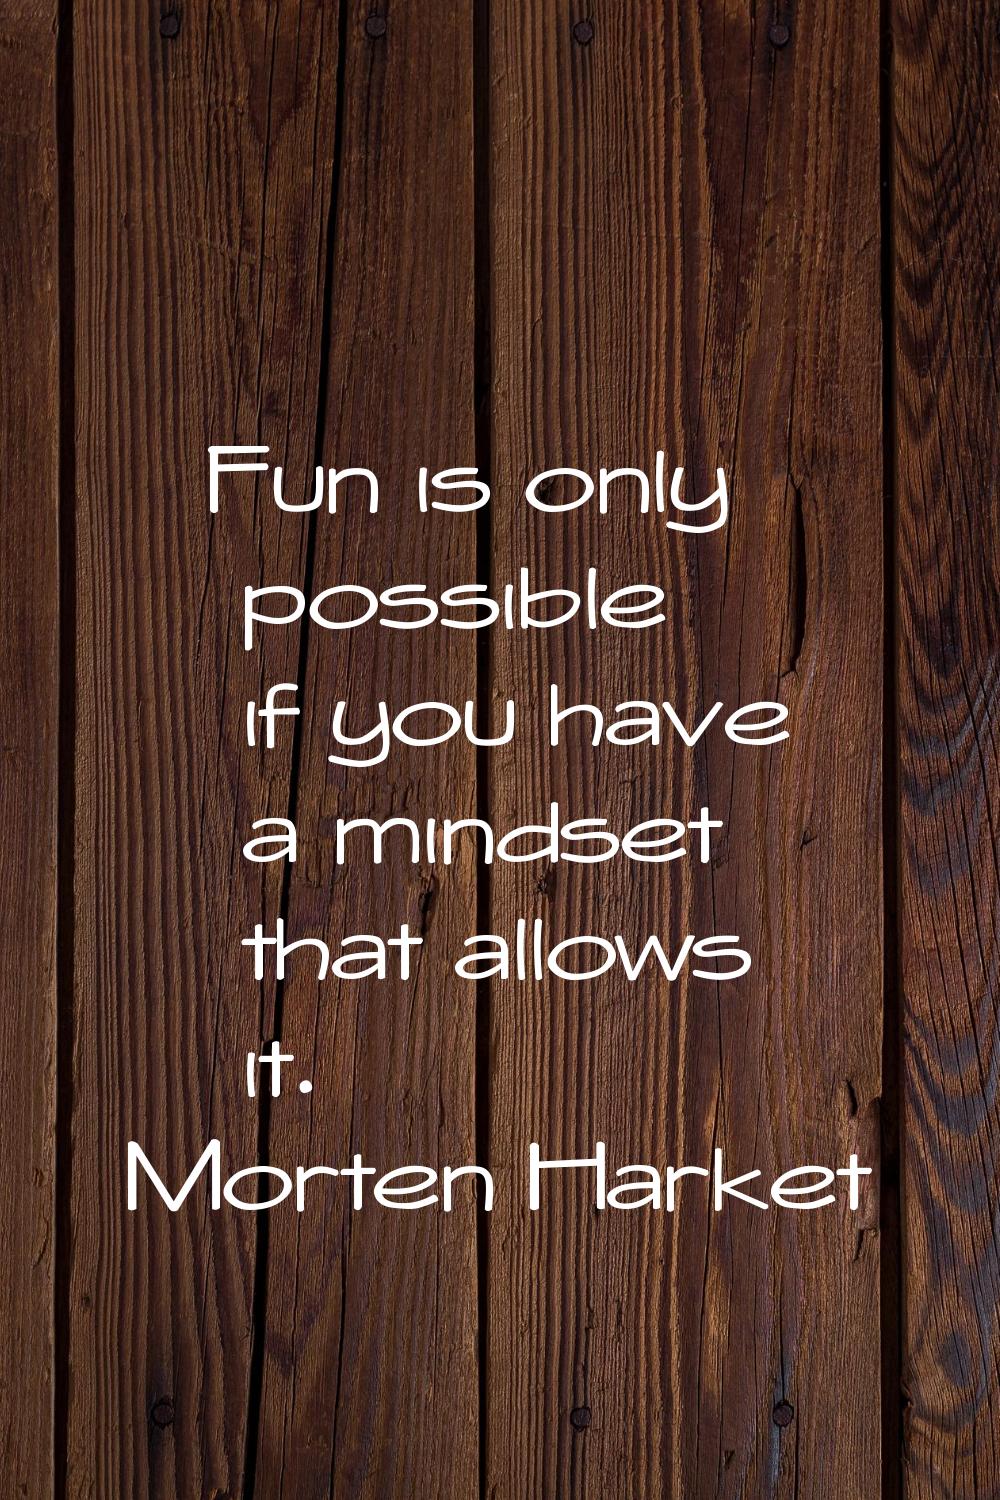 Fun is only possible if you have a mindset that allows it.